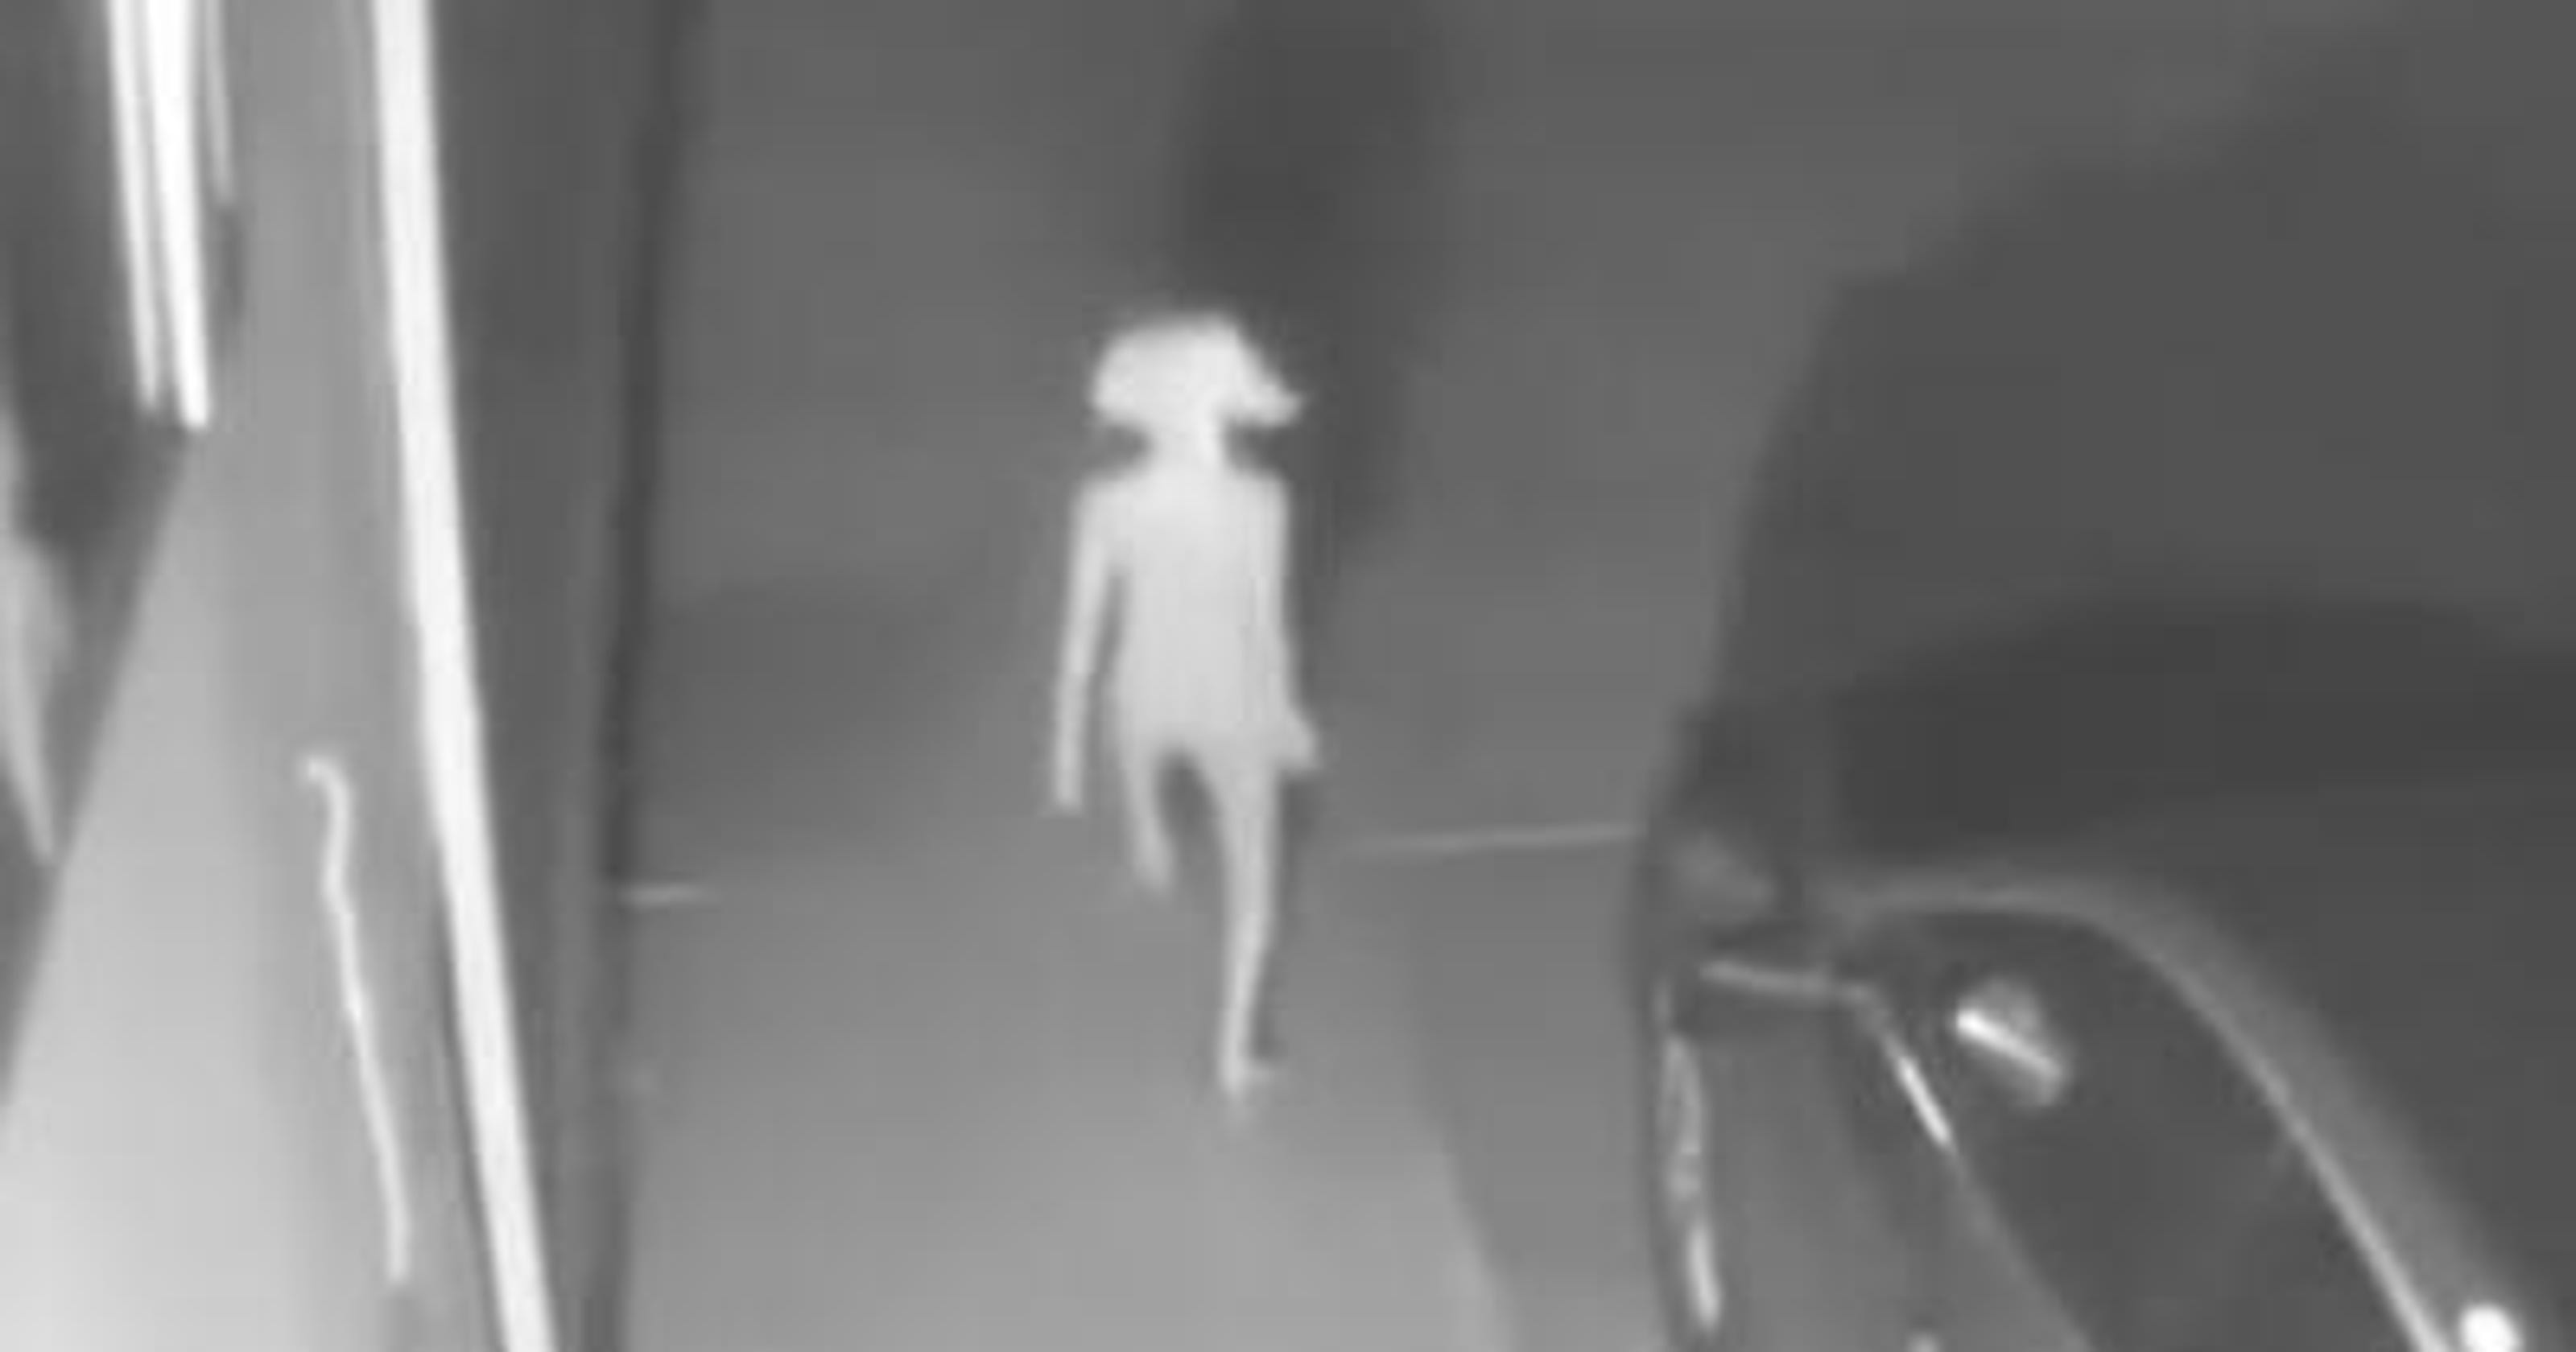 Odd creature caught on security camera, and Internet has ...